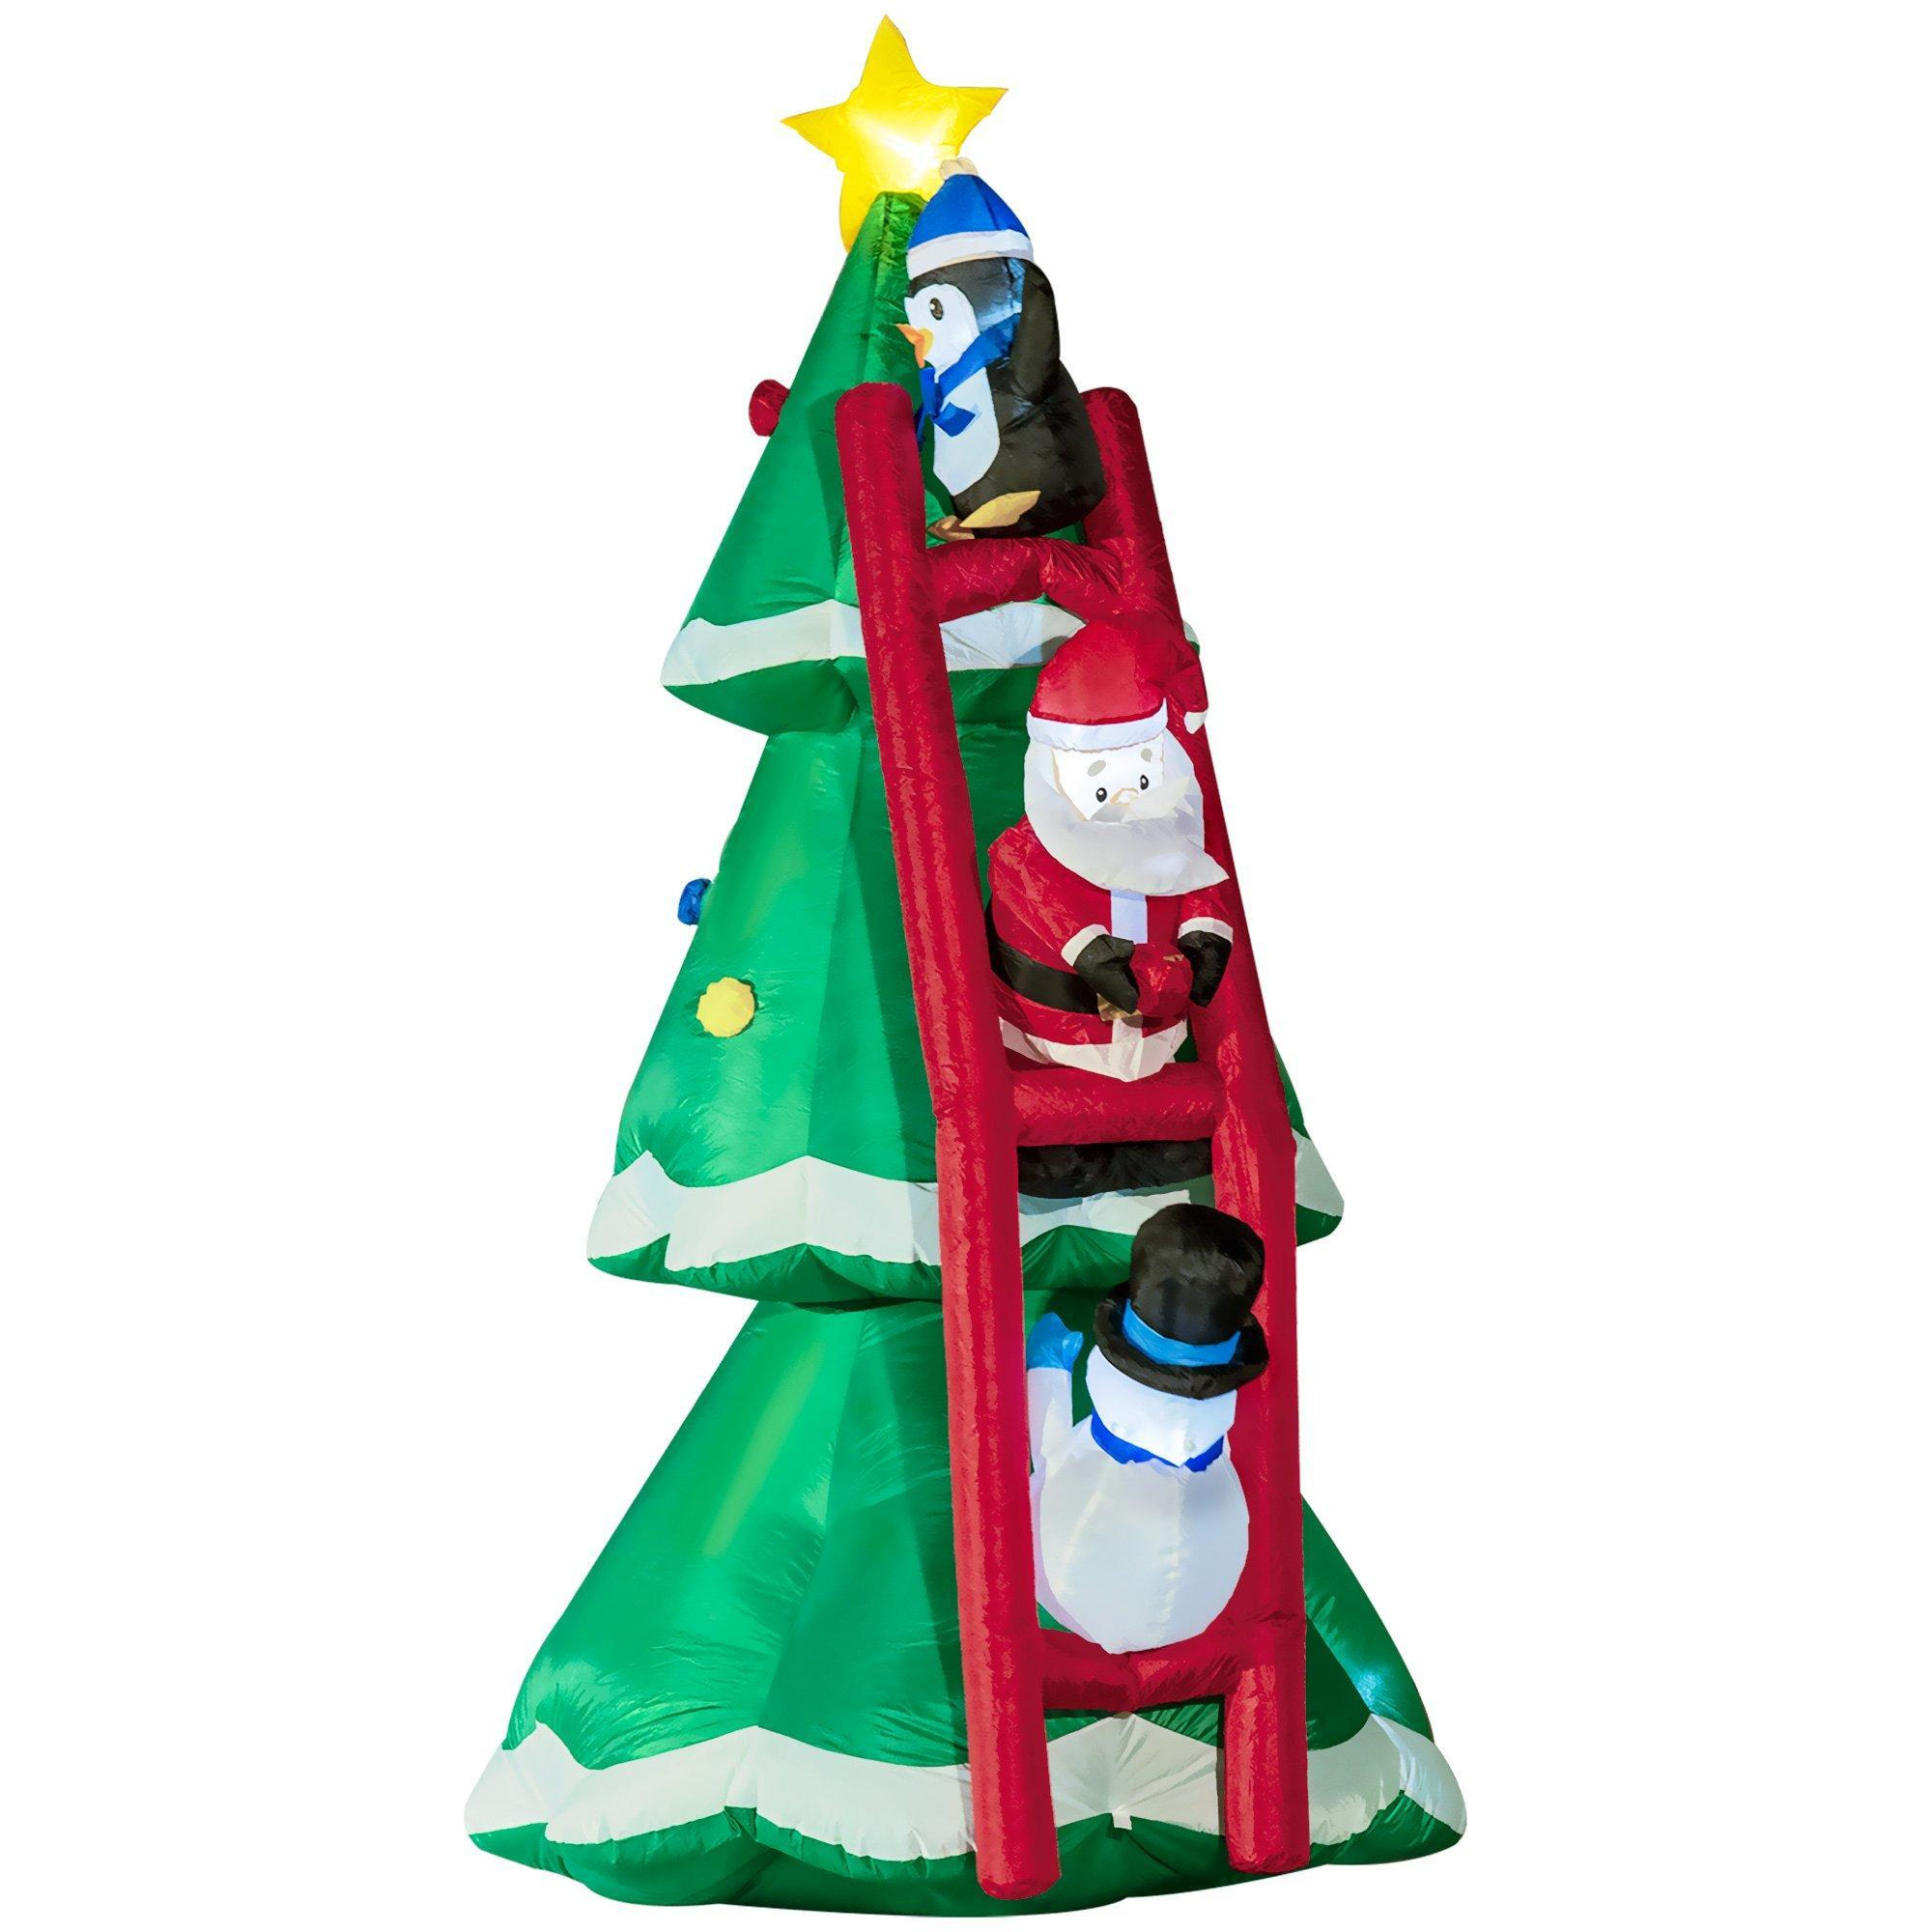 8ft Inflatable Christmas Tree with Santa Claus Penguin Snowman - image 1